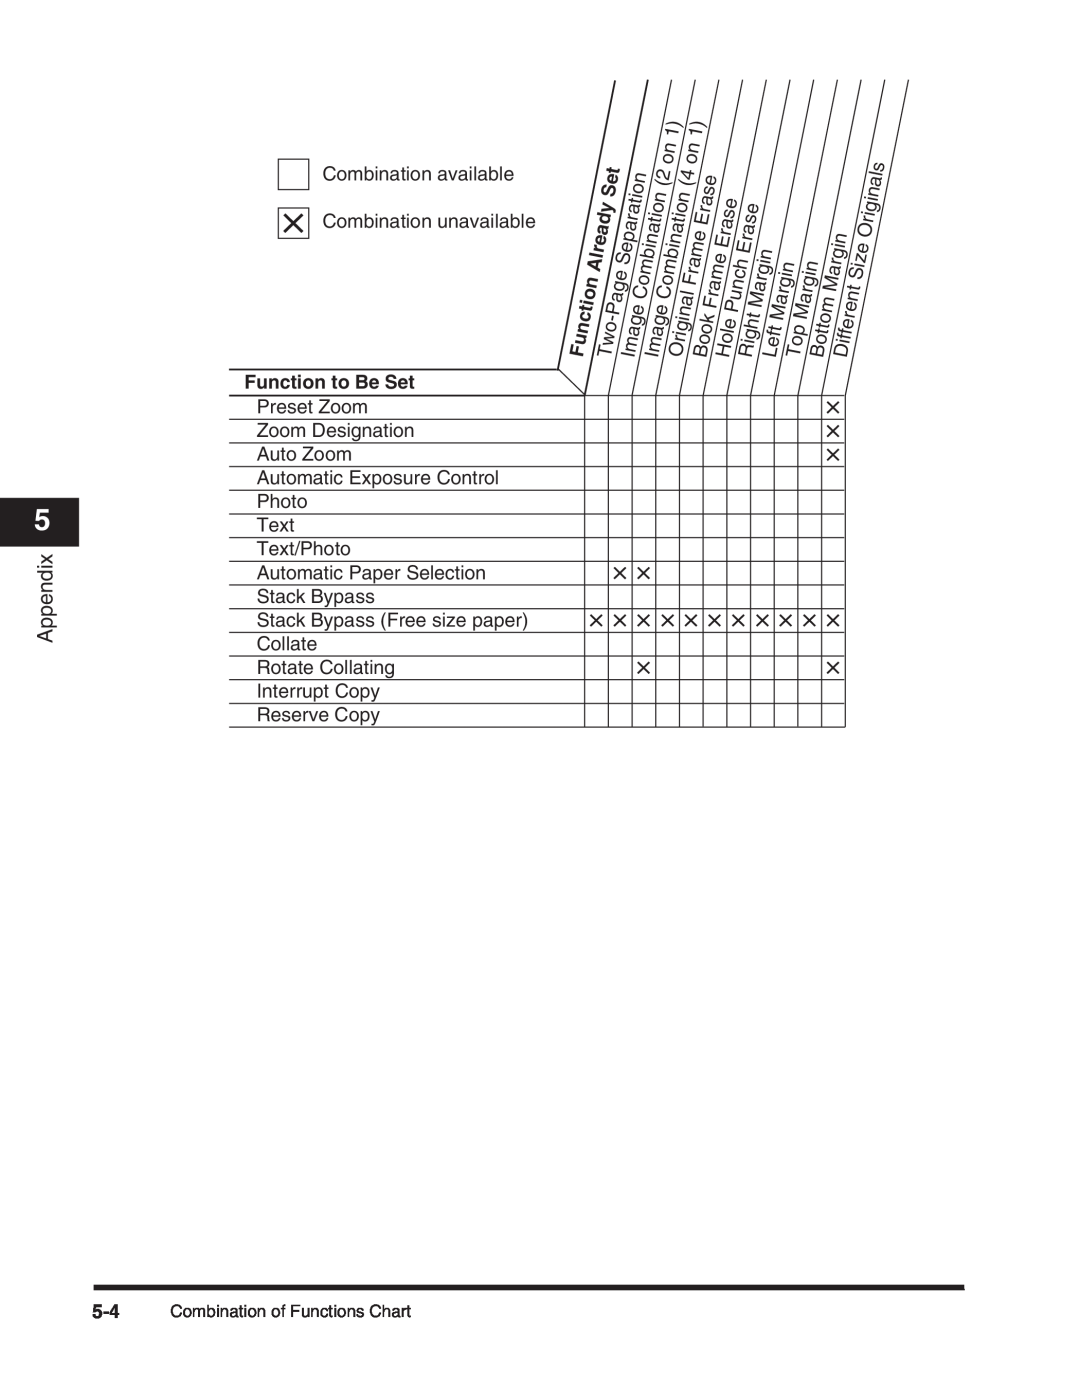 Canon 2300 manual Appendix, Function to Be Set, Combination of Functions Chart 